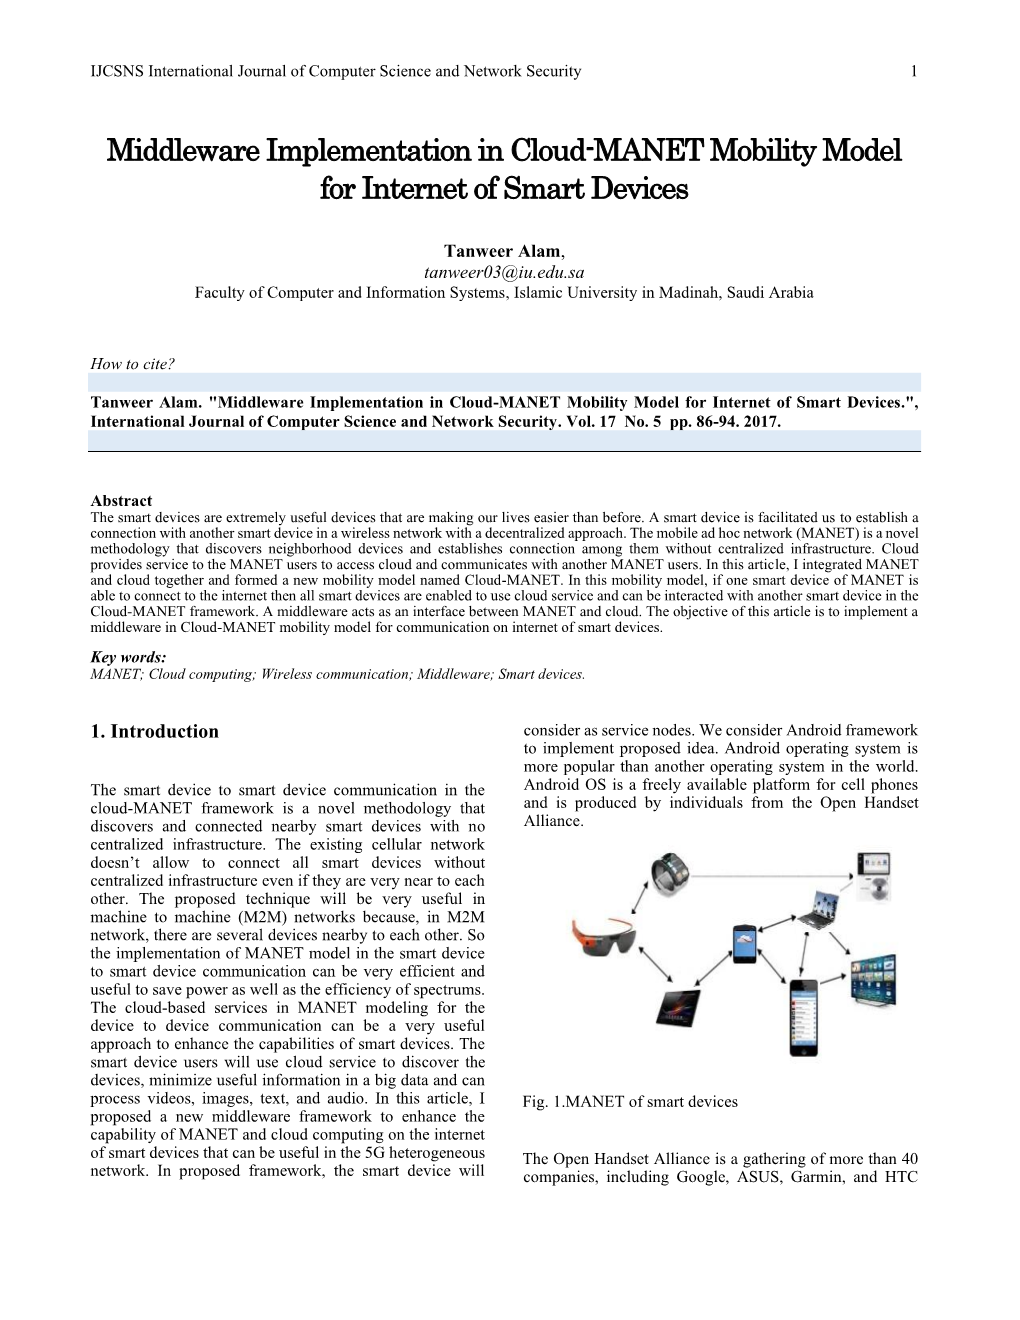 Middleware Implementation in Cloud-MANET Mobility Model for Internet of Smart Devices